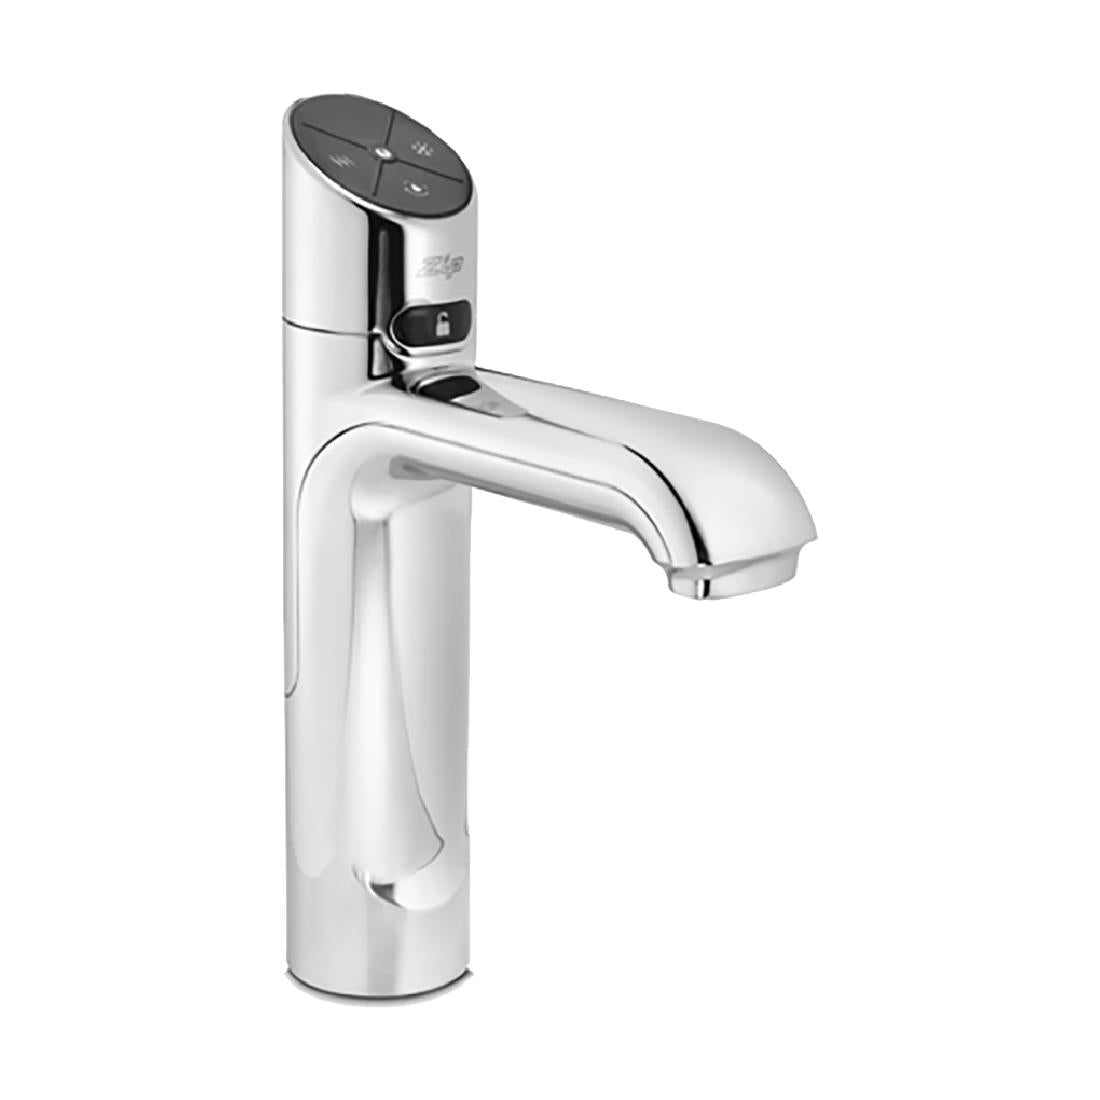 CX293 ZIP HydroTap G5 Classic Plus Boiling Chilled 160/175 Bright Chrome JD Catering Equipment Solutions Ltd